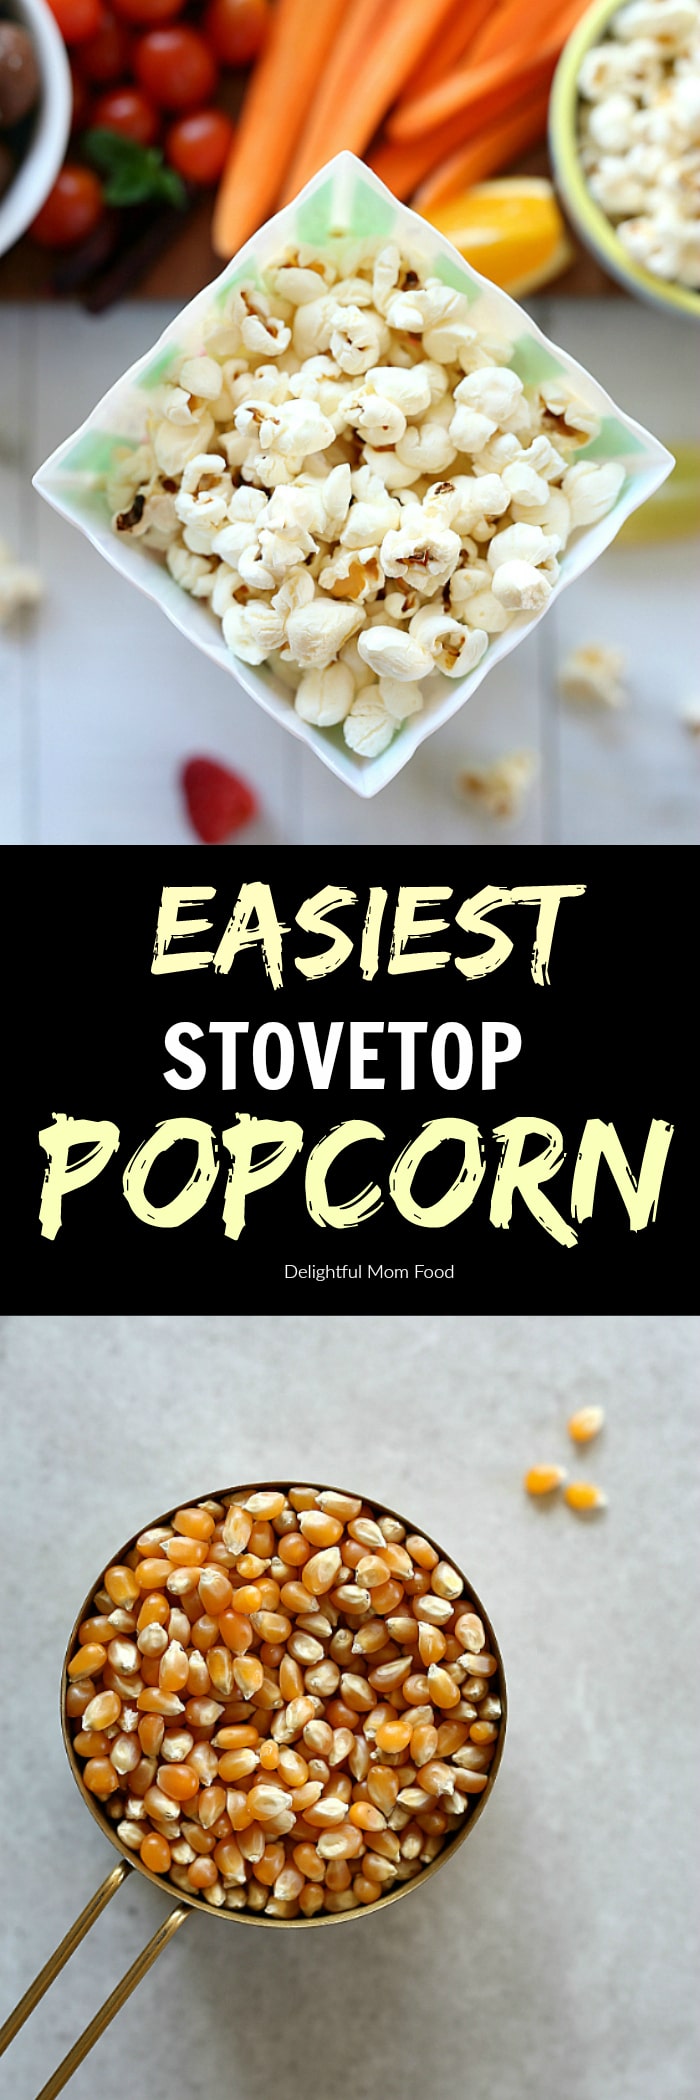 The EASIEST stovetop popcorn recipe popped on the stove in as little as 10 minutes! How to make popcorn on the stove in a few simple steps with corn kernels, coconut oil and a dash of pink salt! #stovetop #popcorn #snacks #easy #healthy #kernels #quick #glutenfree | recipe at delightfulmomfood.com